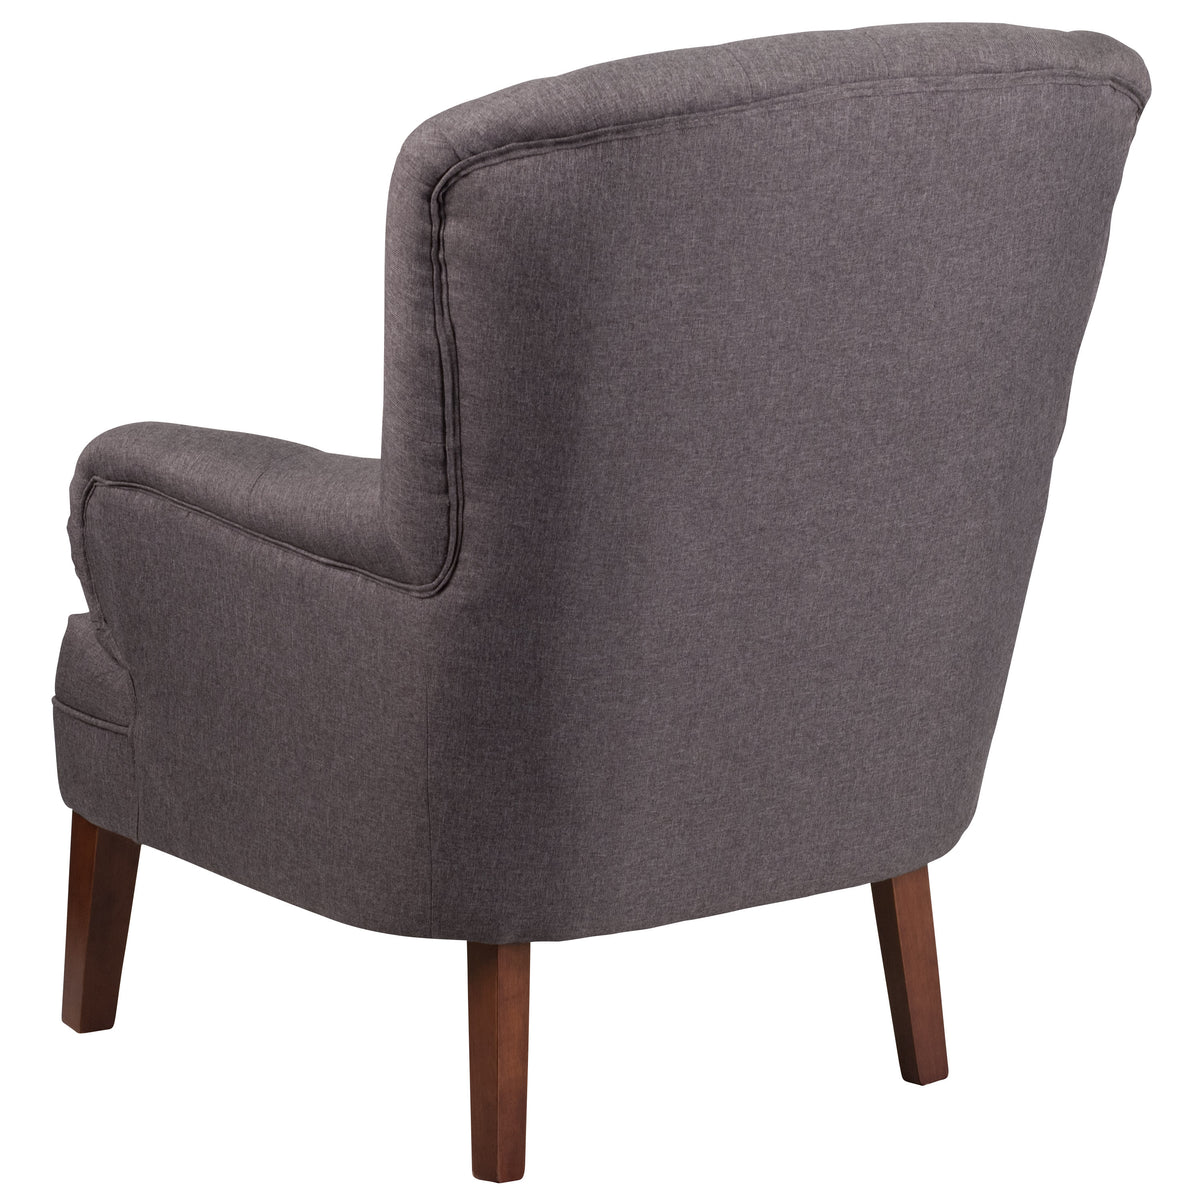 Gray |#| Gray Fabric Upholstered Button Tufted Arm Chair with Curved Arms and Wood Legs